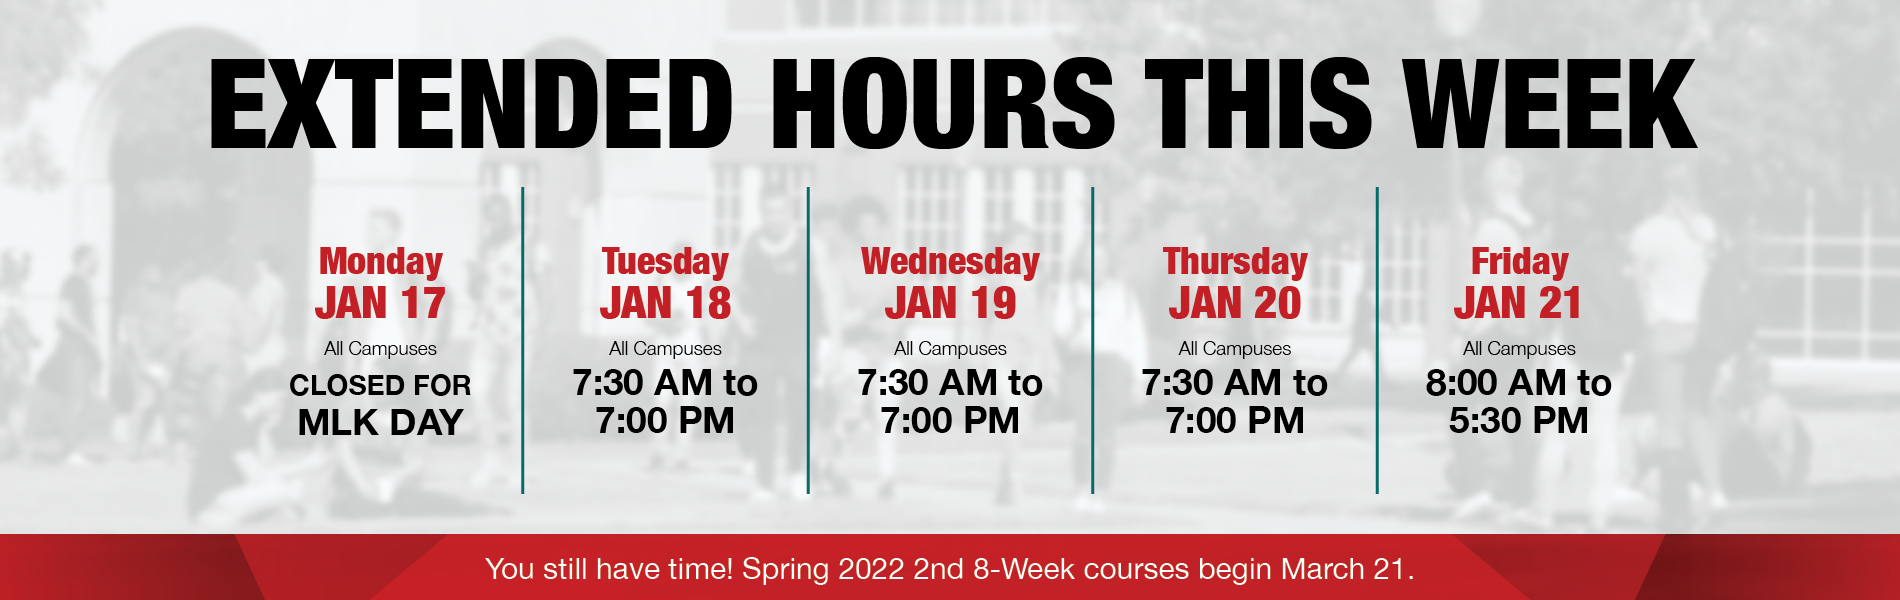 Spring 2022 Extended Hours